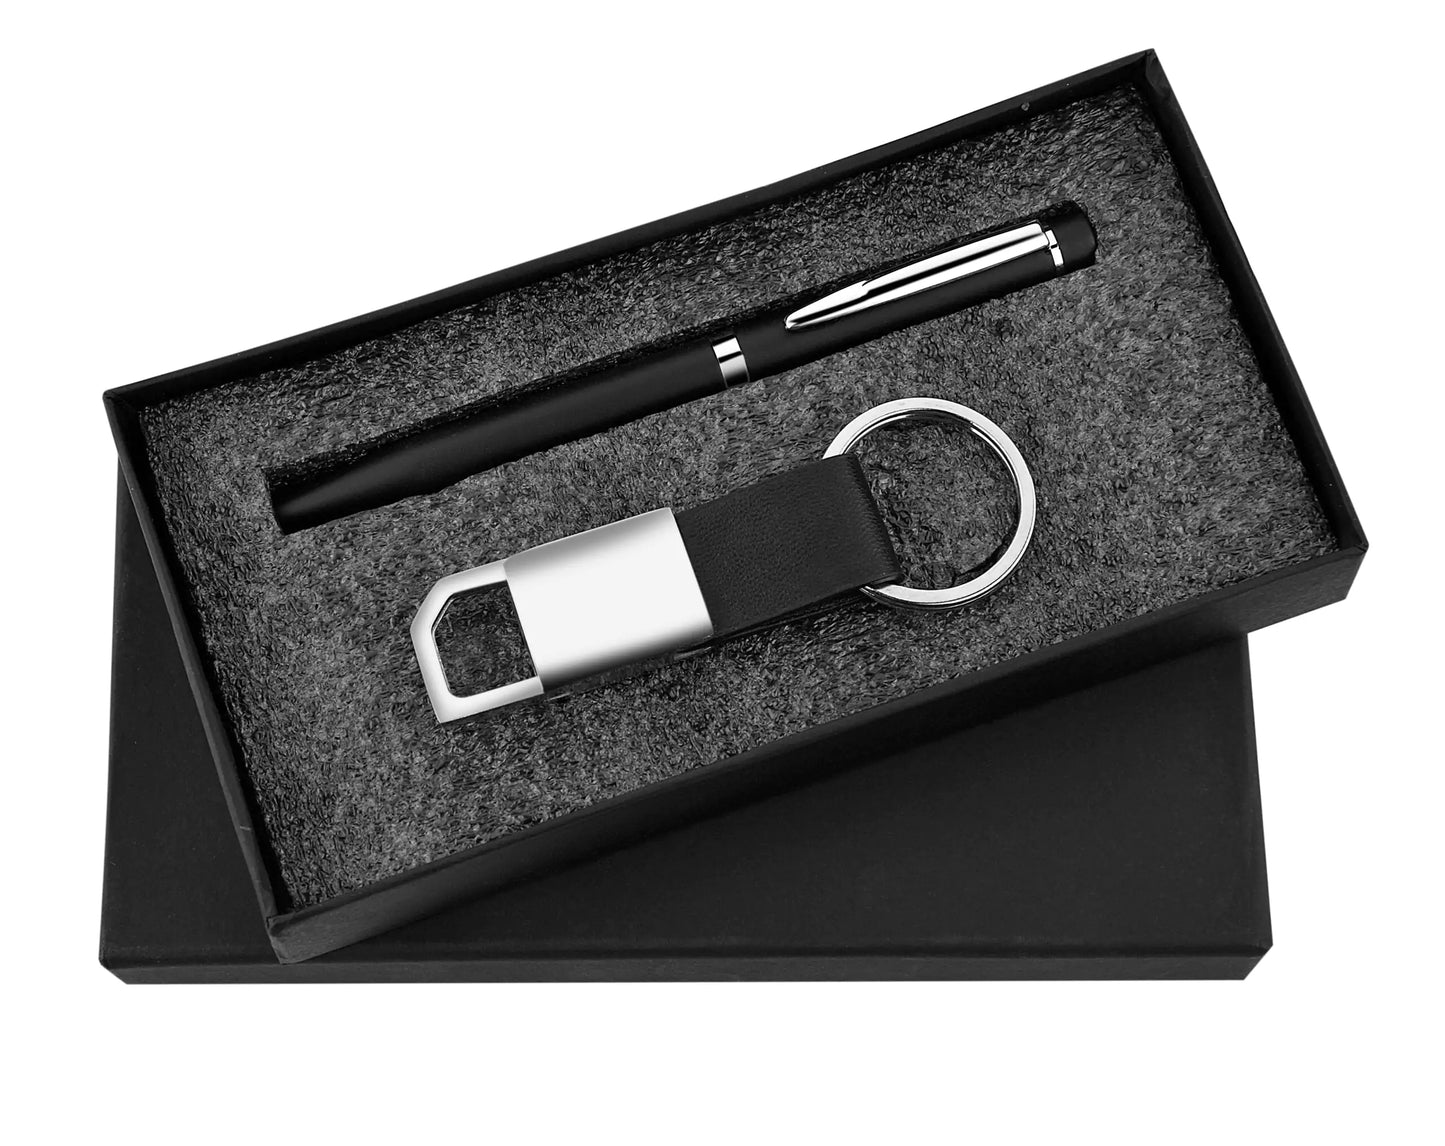 Pen and Keychain 2in1 Combo Gift Set - For Employee Joining Kit, Corporate, Client or Dealer Gifting, Promotional Freebie JKSR111